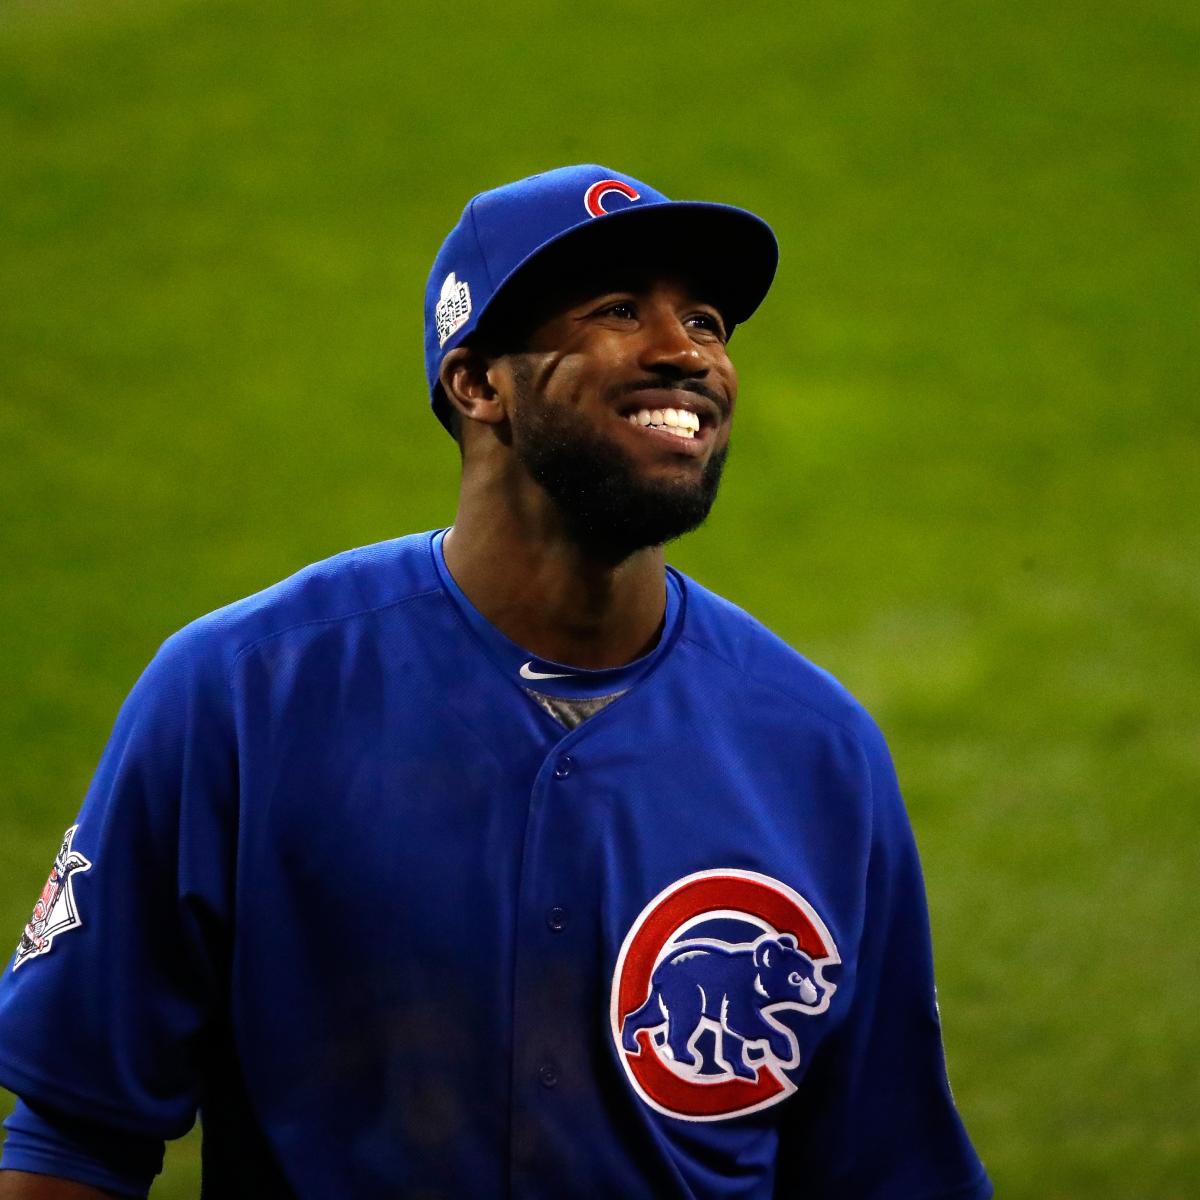 Depressed' last season, Dexter Fowler is energized by the belief the  Cardinals have shown in him